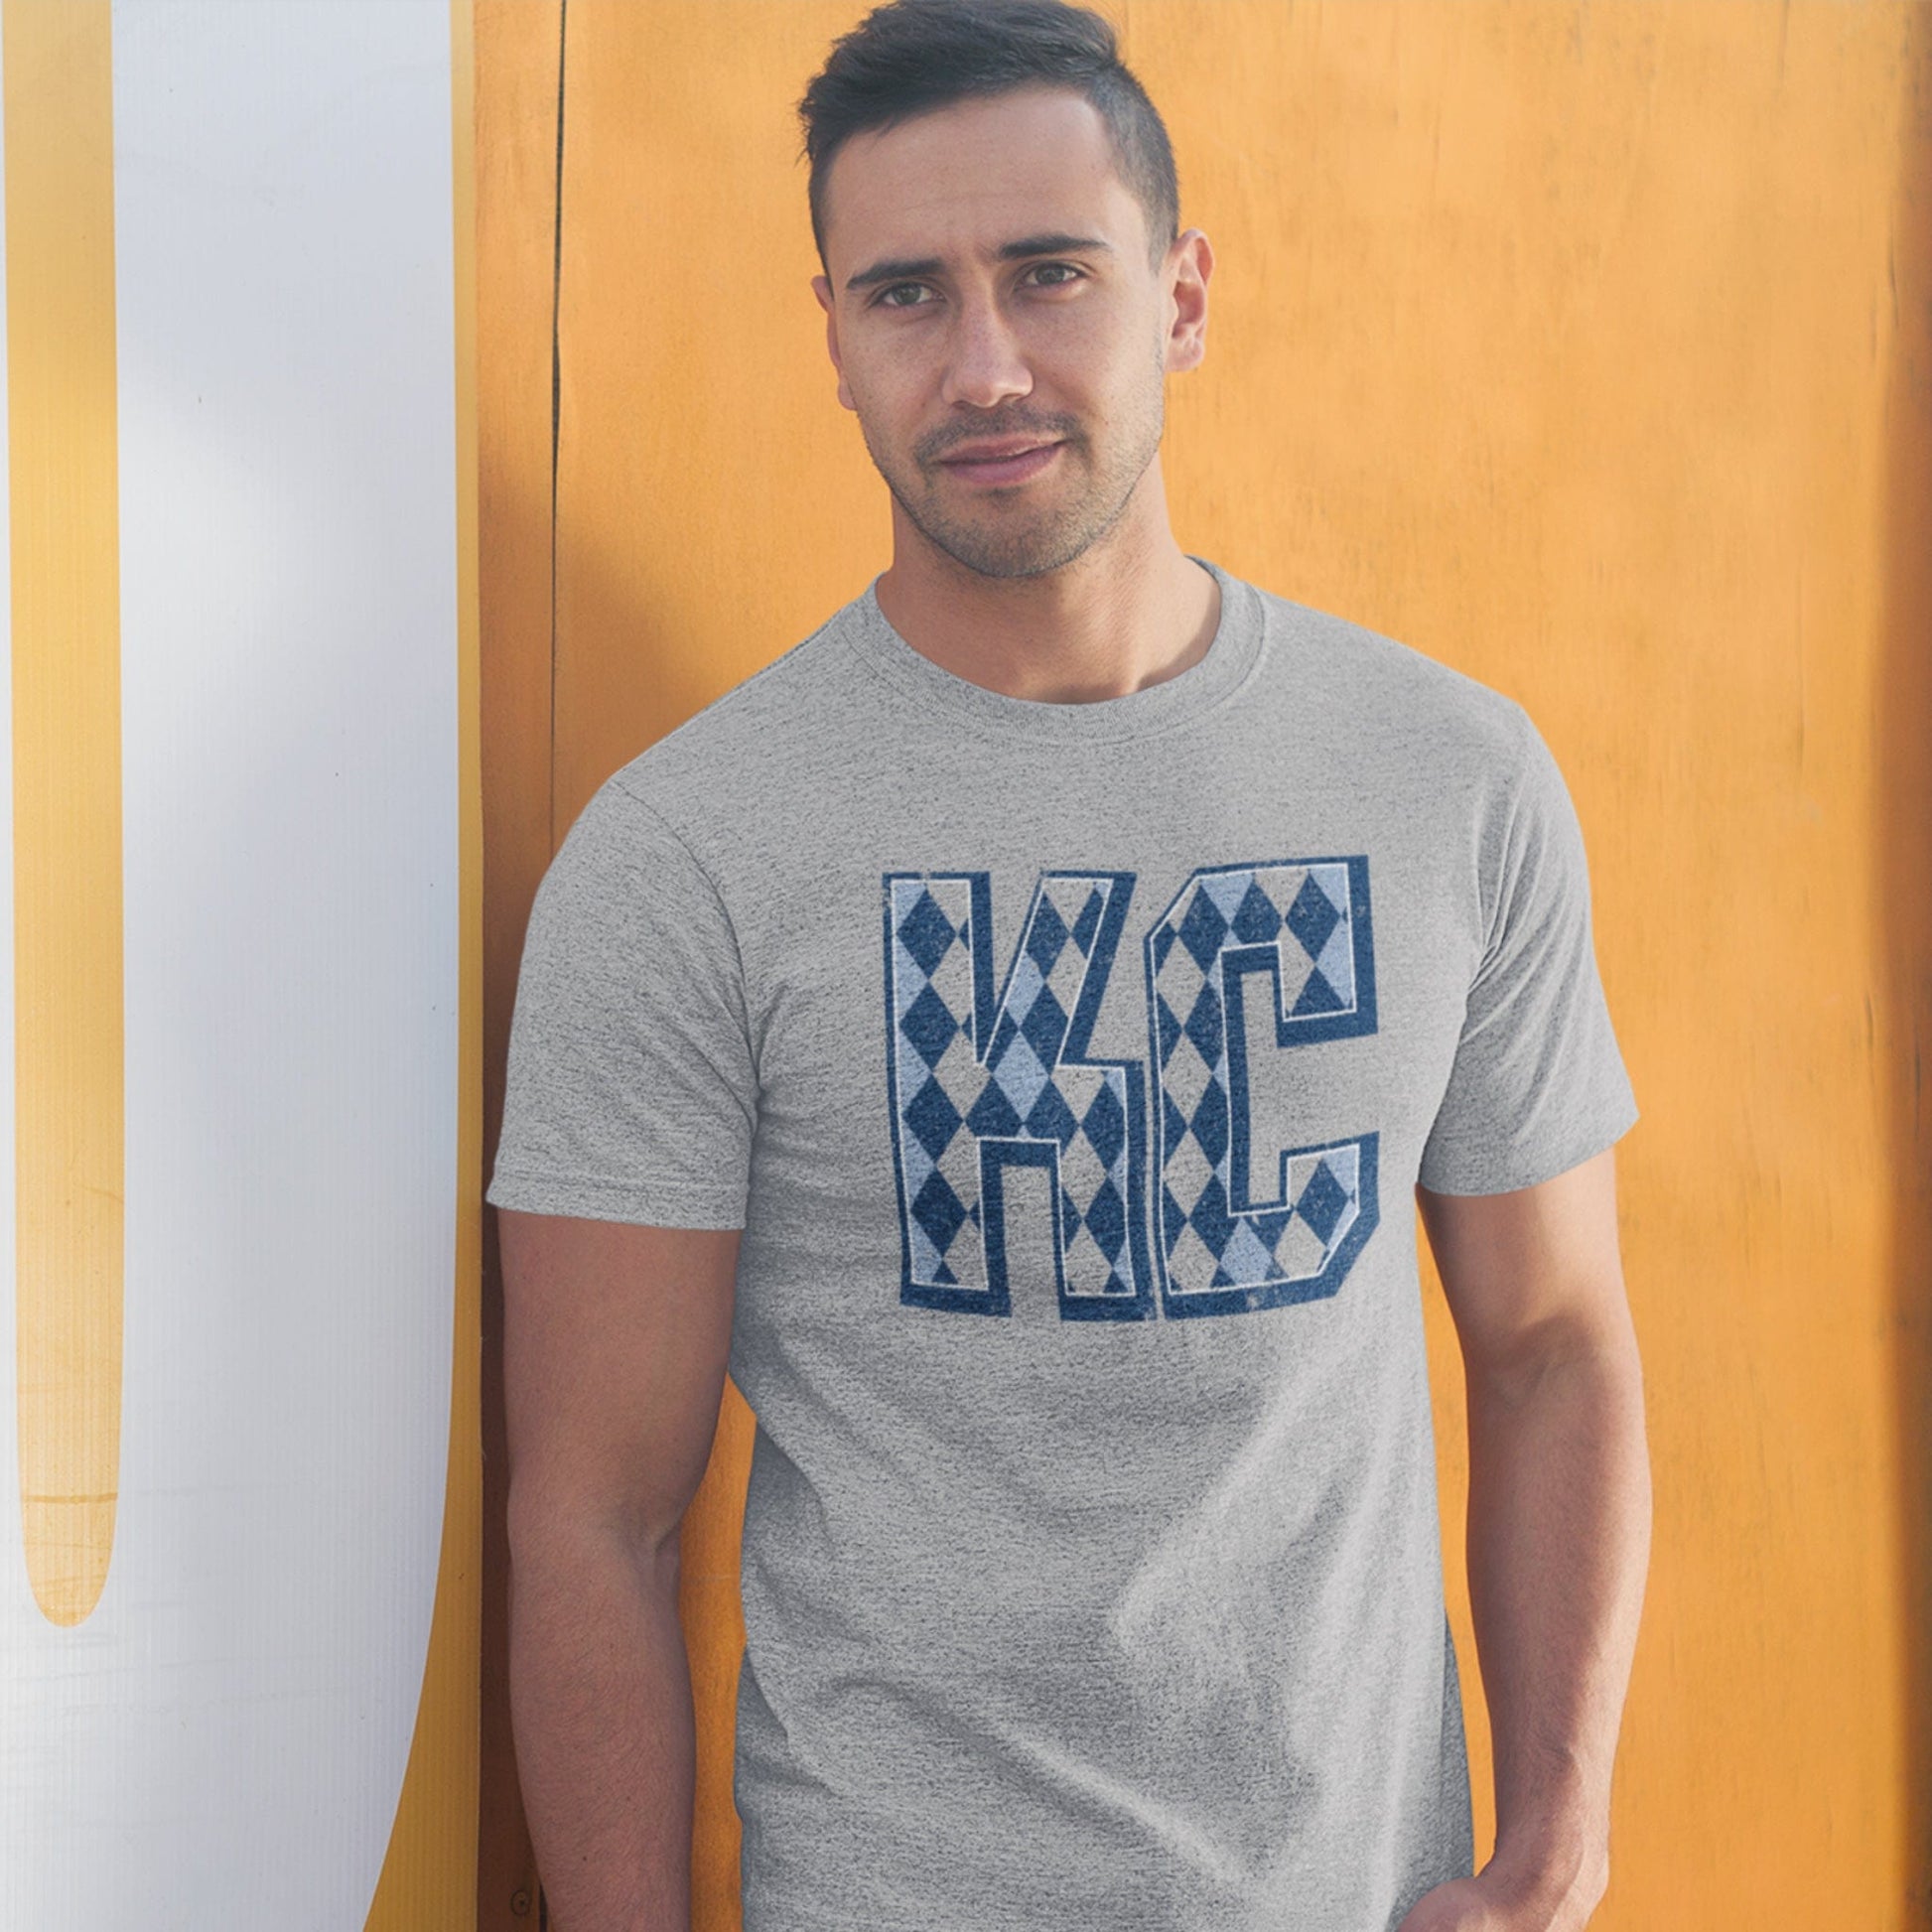 KC Swag Sporting Kansas City powder blue/navy/grey ARGYLE PATTERN KC on athletic heather grey t-shirt worn by male model leaning against yellow wall